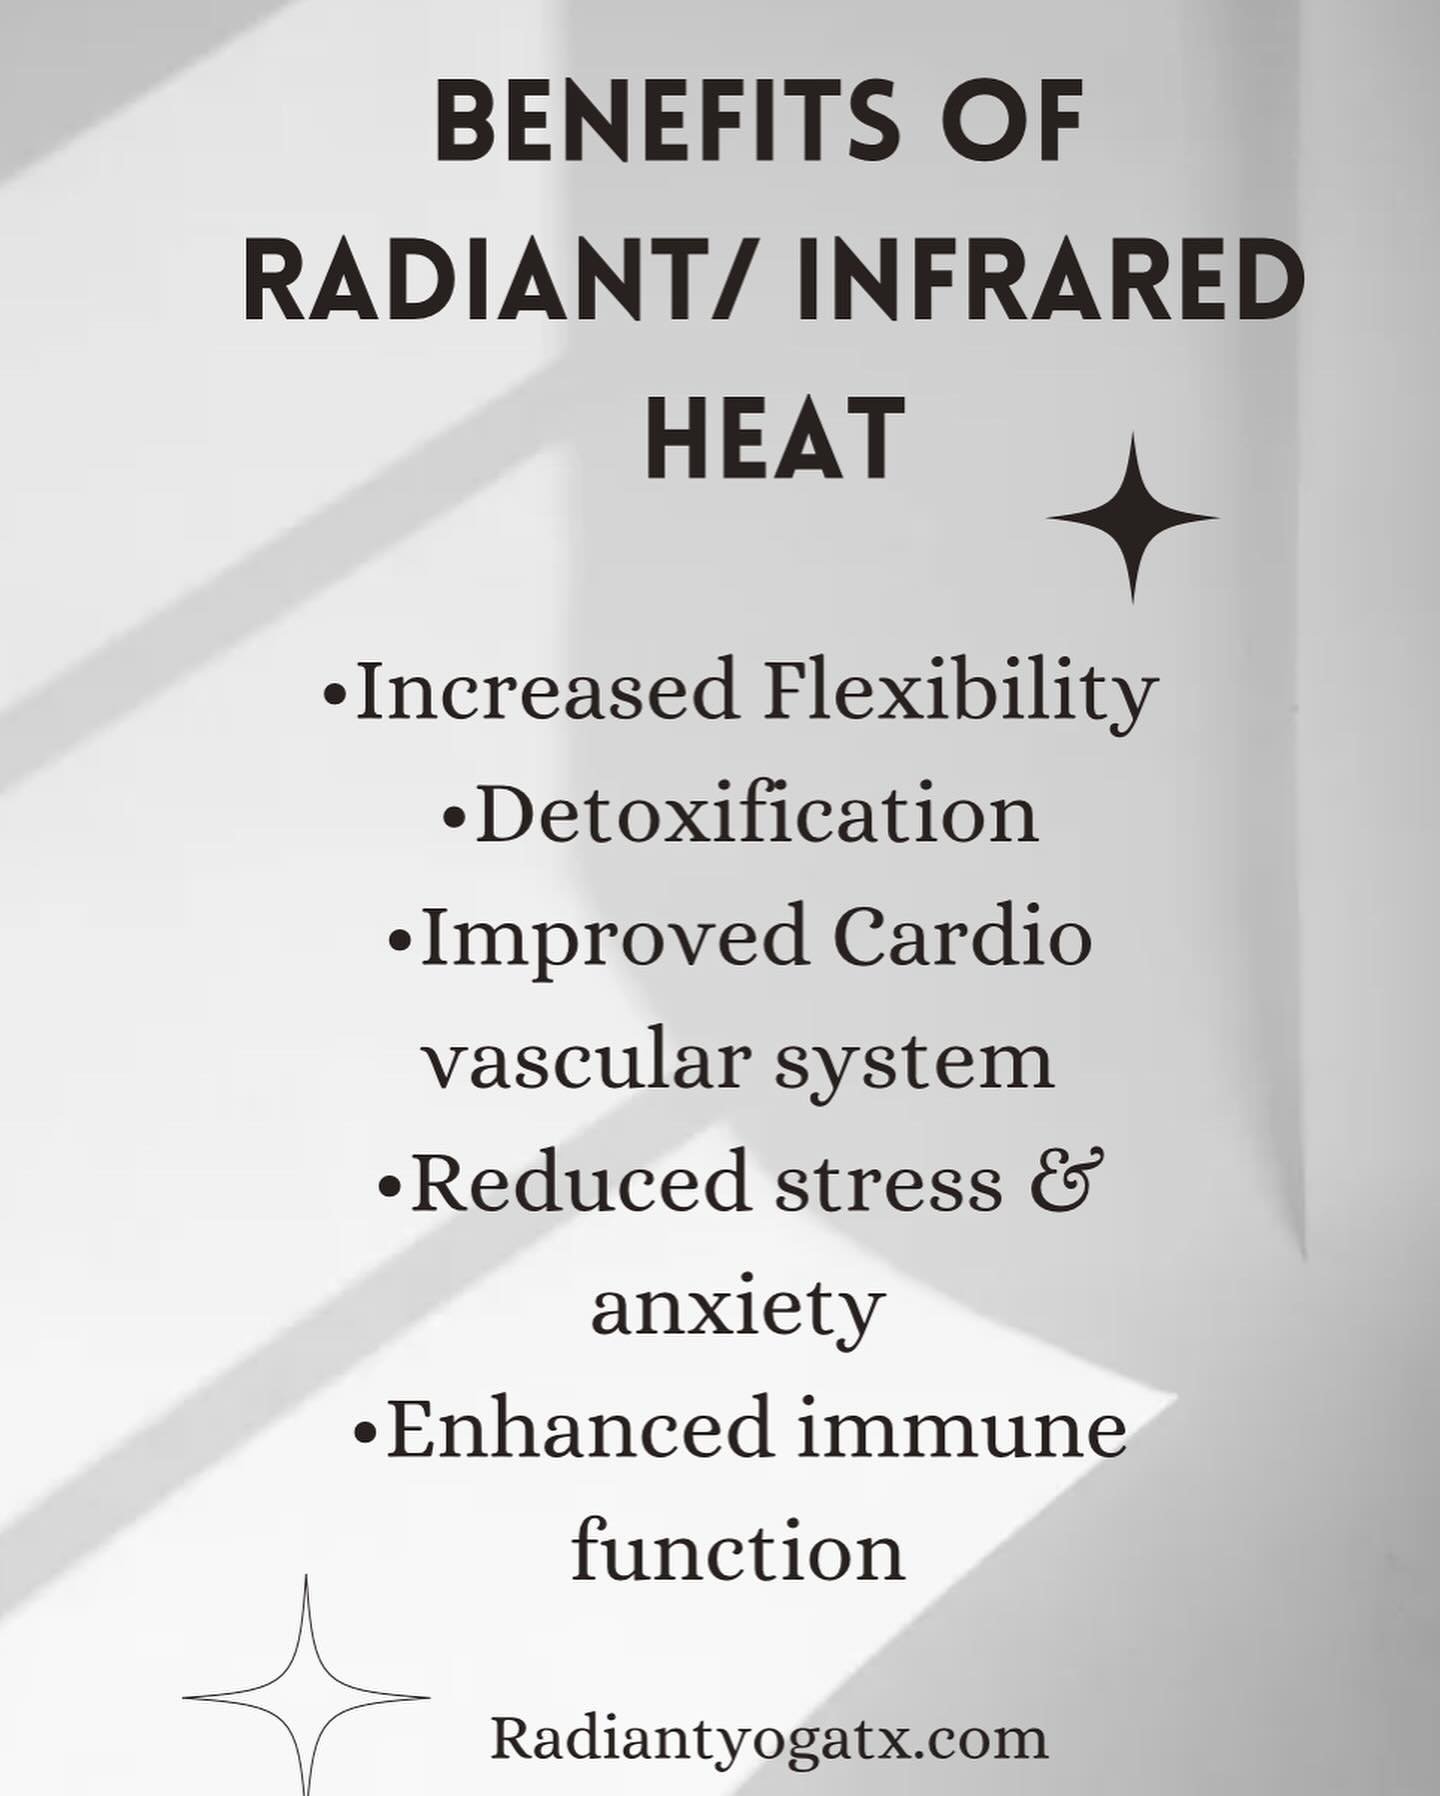 We&rsquo;ve had questions on why we chose radiant/ infrared heat panels. It was an easy decision with  so many amazing benefits:
🤍Detoxification 
🤍Improved cardio vascular health 
🤍Increased flexibility 
🤍Reduced stress and anxiety 
🤍 Enhanced i